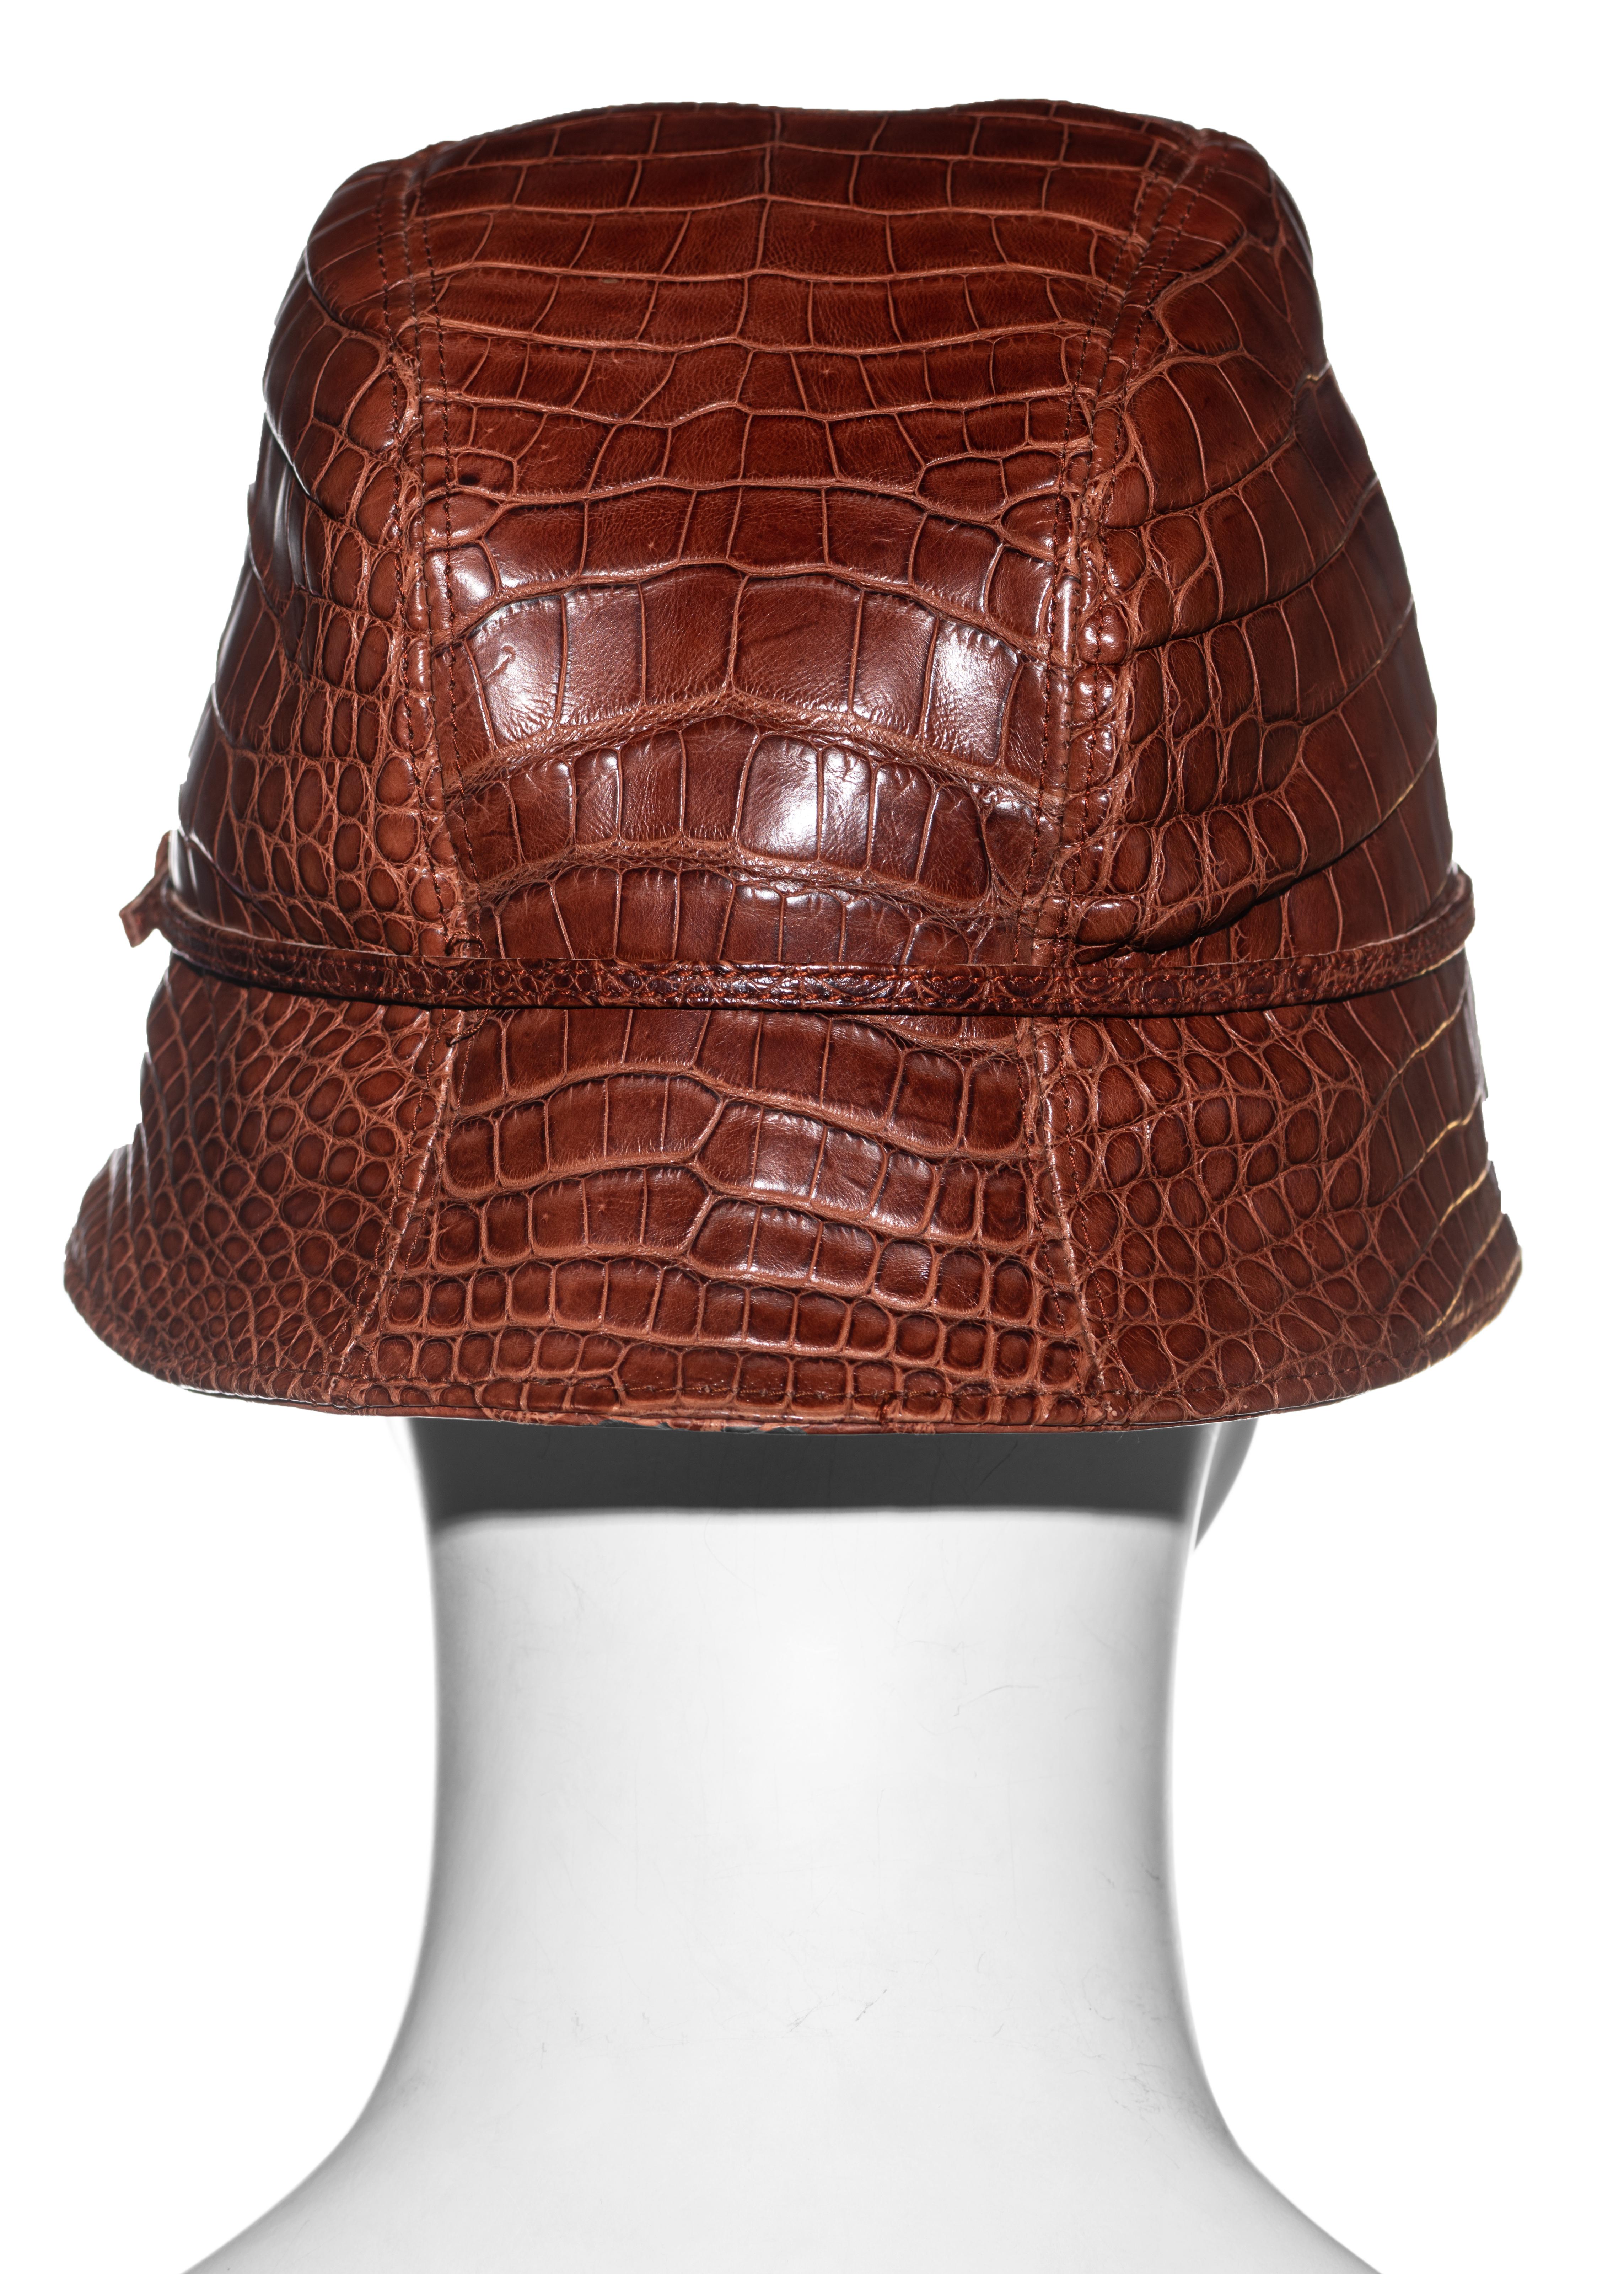 Prada brown alligator bucket hat, fw 2003 In Excellent Condition For Sale In London, GB